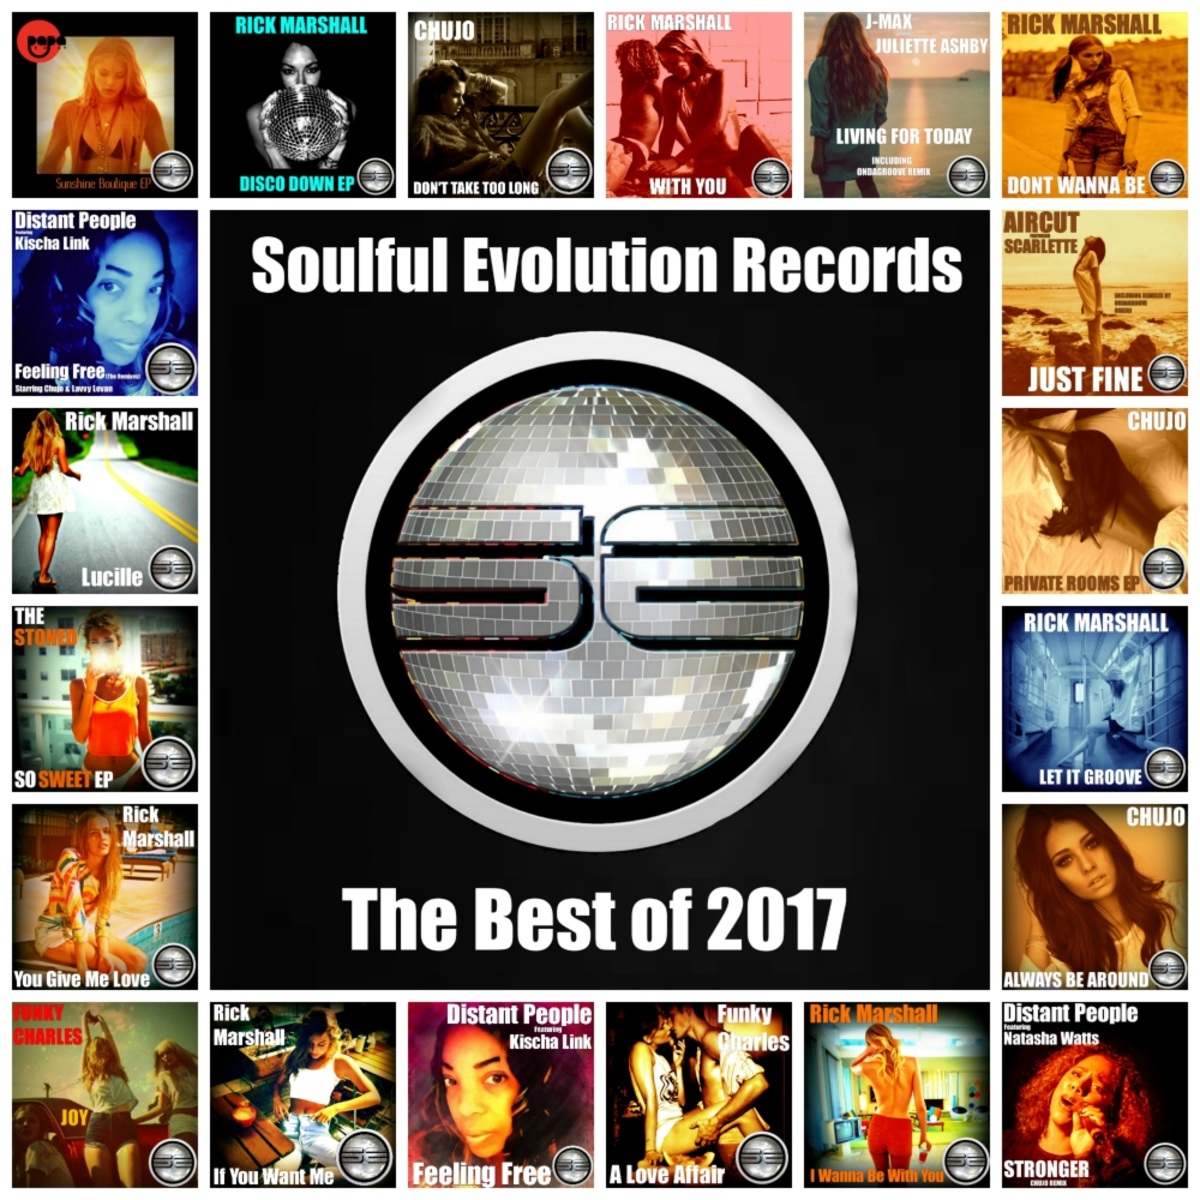 VA - Soulful Evolution Records The Best of 2017 / Soulful Evolution